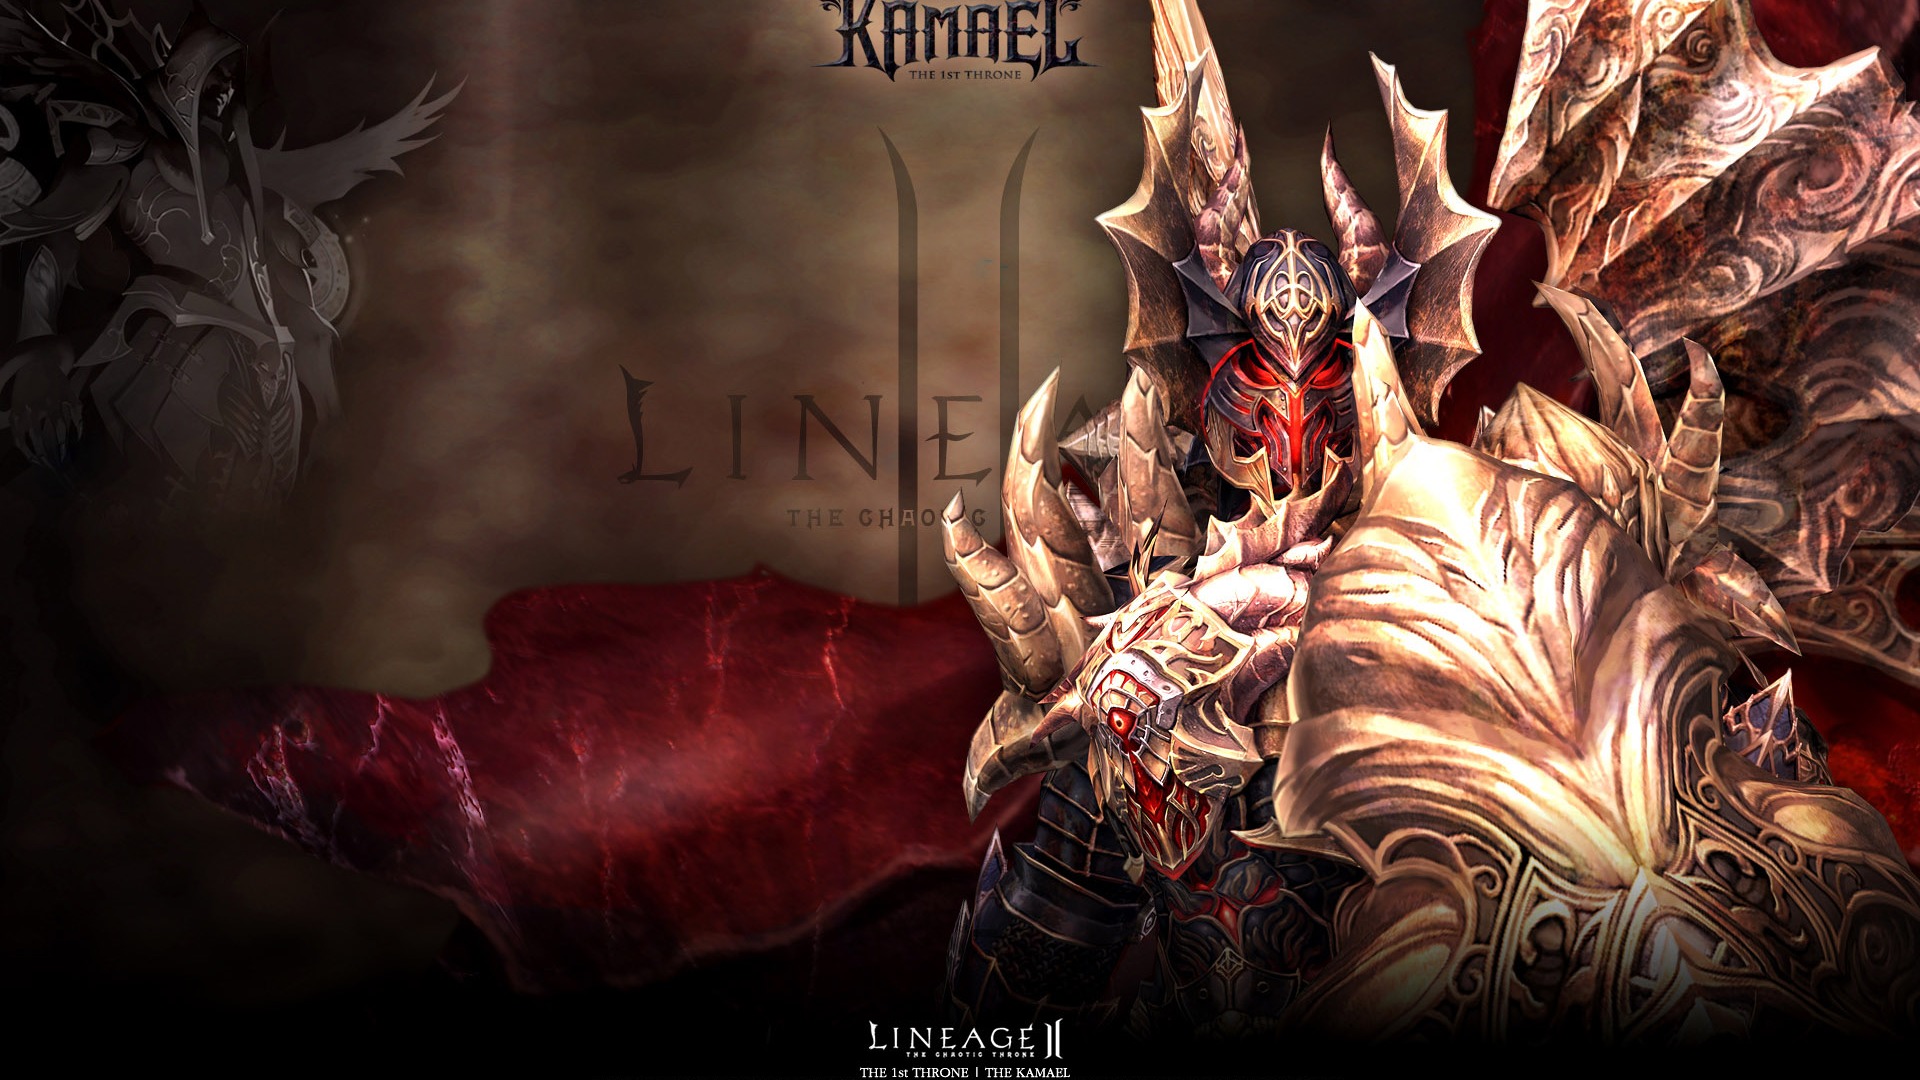 LINEAGE Ⅱ modeling HD gaming wallpapers #11 - 1920x1080